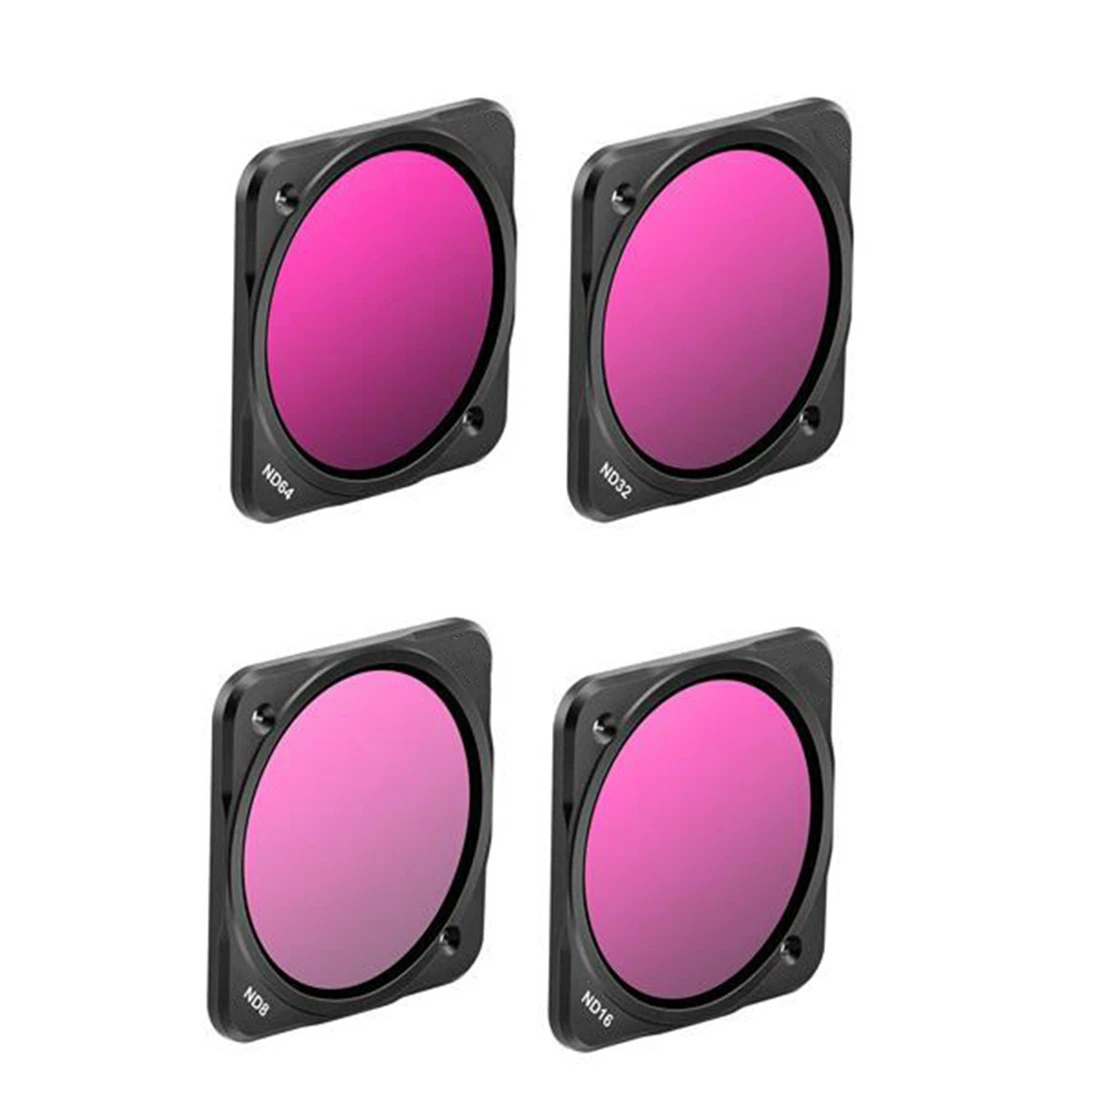 

Action 2 Filter UV CPL ND4/ND8/ND16/ND32 Optical Glass Lens Filters Set For DJI Osmo Action 2 Camera Accessories